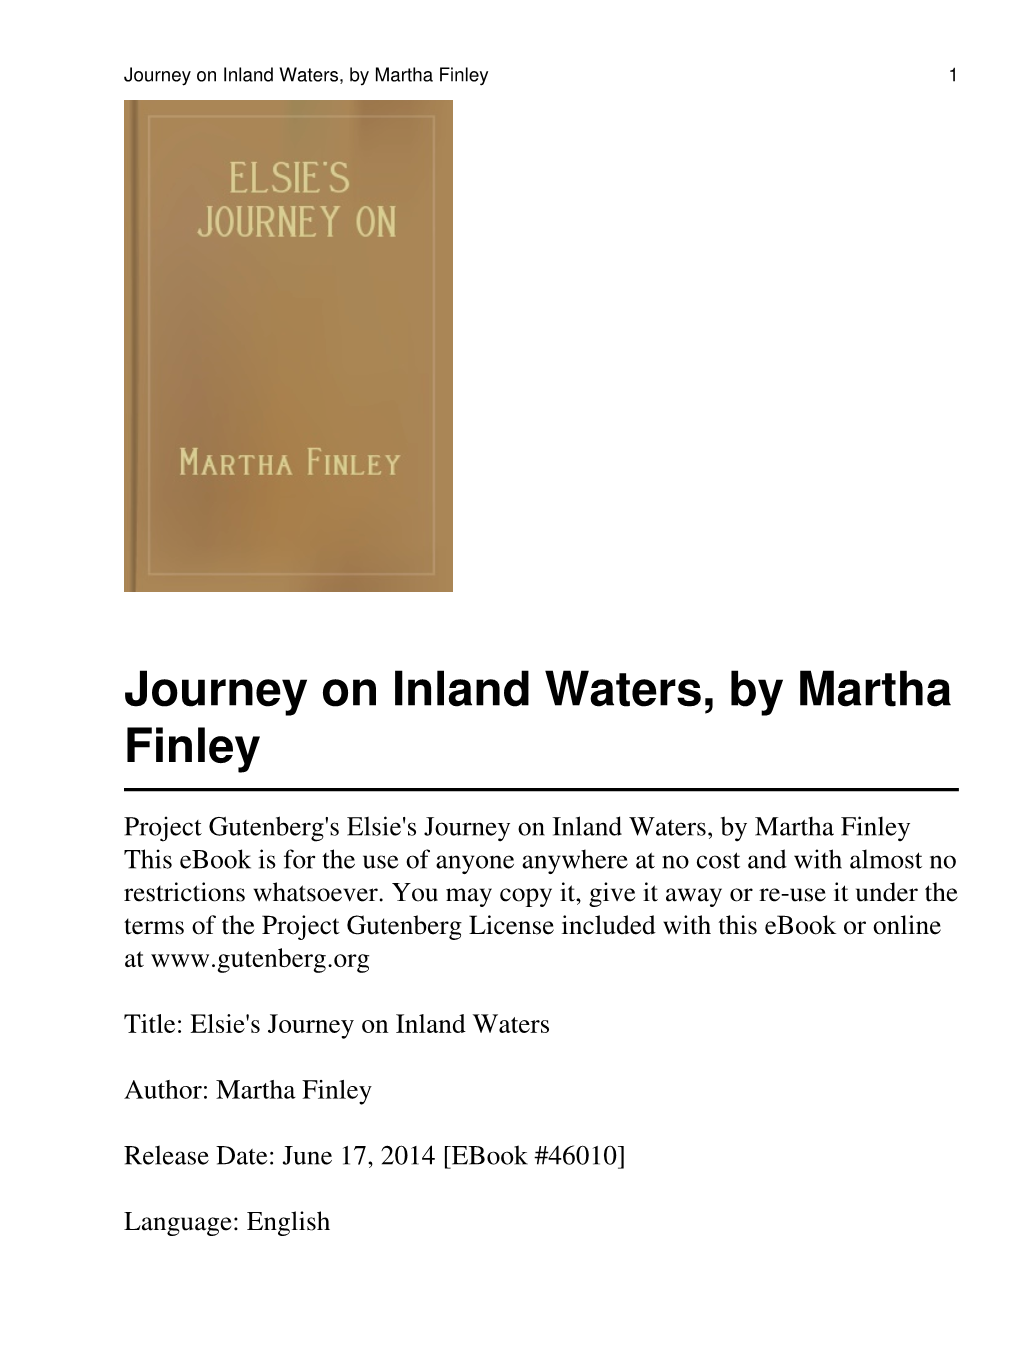 Elsie's Journey on Inland Waters, by Martha Finley This Ebook Is for the Use of Anyone Anywhere at No Cost and with Almost No Restrictions Whatsoever